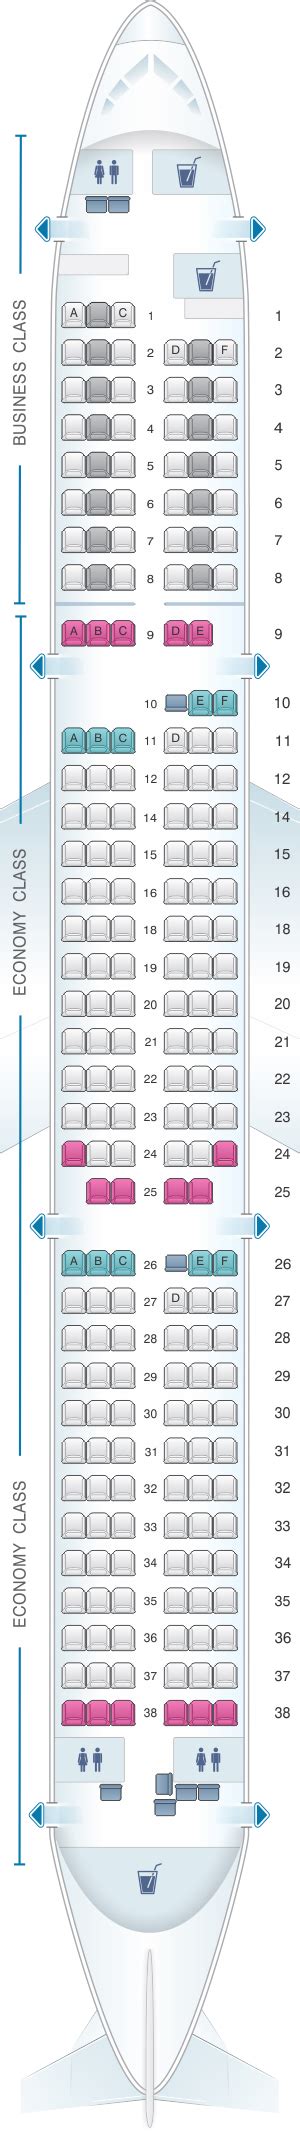 Seats 218. Pitch 29-30". Width 17.7". Recline 3". On the Airbus A321-200 V.1, British Airways offers an economy class that's tailored for long-haul comfort. Designed for 218 passengers, the cabin is spacious and well-appointed, ensuring a pleasant flight experience. The seating is optimized for relaxation, and a plethora of entertainment .... 